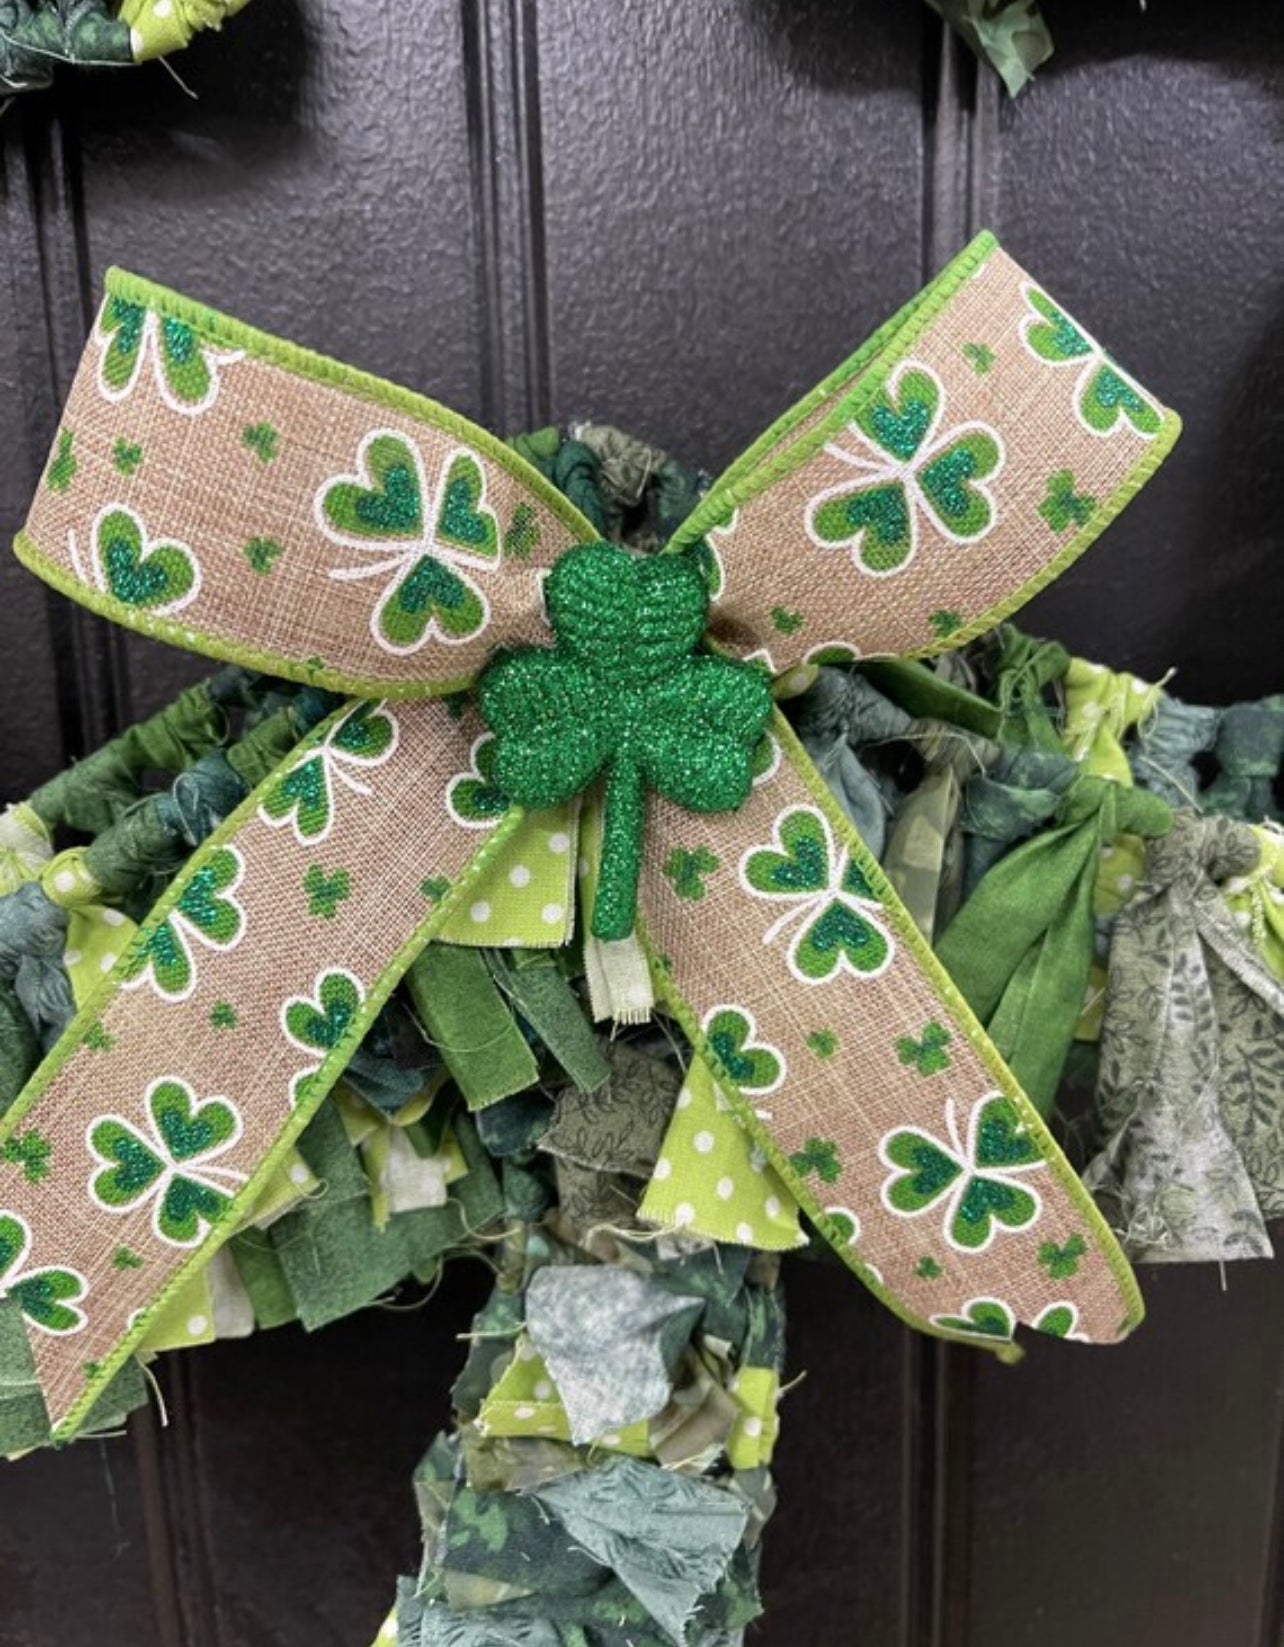 Close up of Detail on Ribbon featuring green shamrocks on beige with a glittered green clover in the center